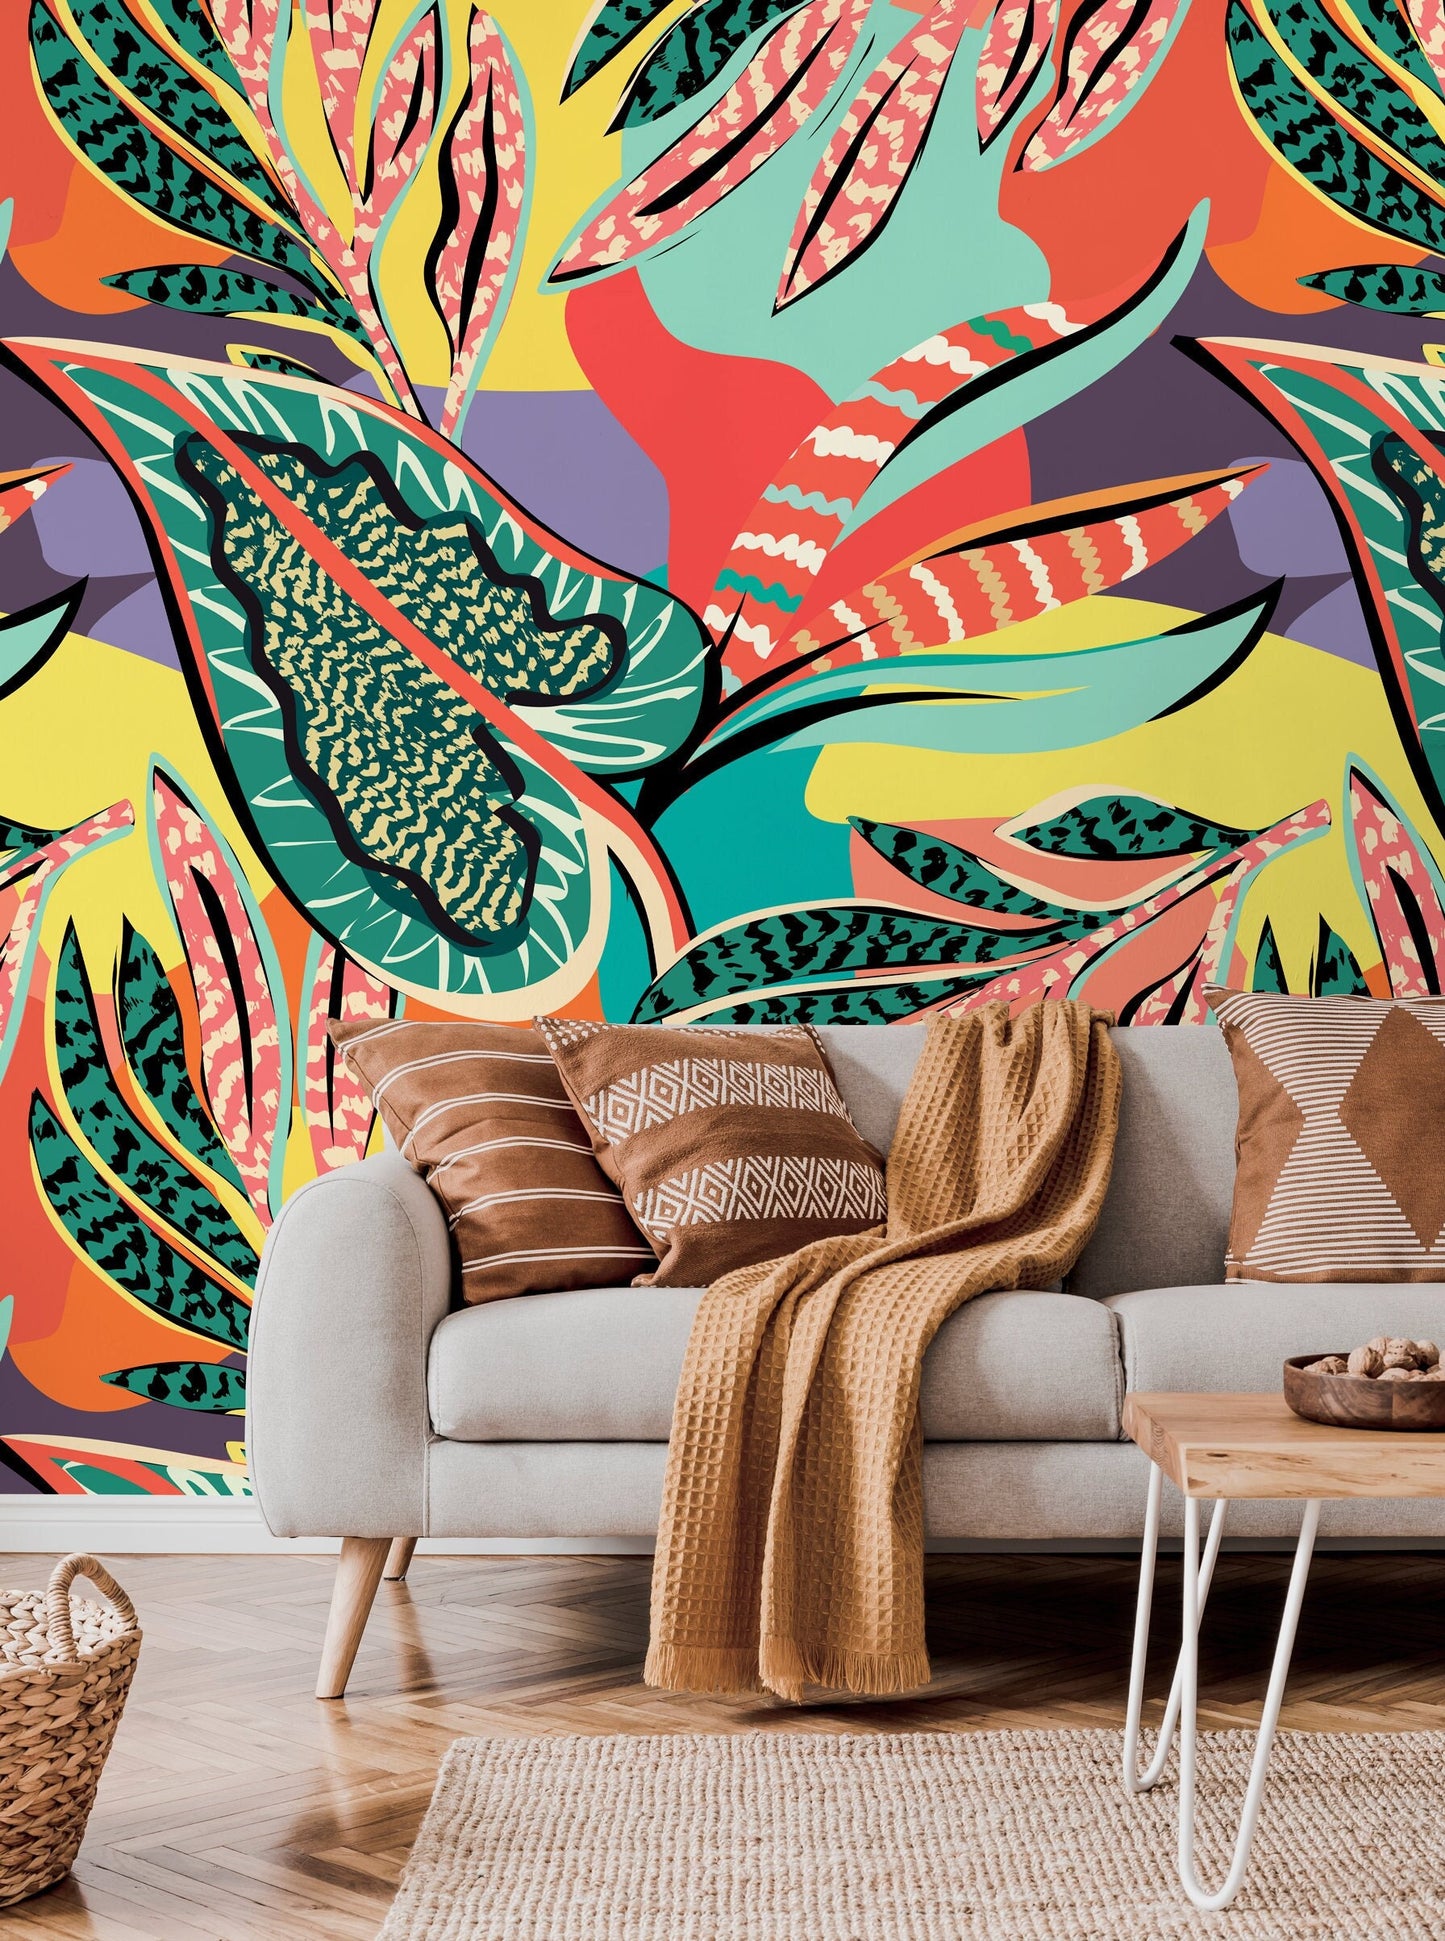 Wallpaper Peel and Stick Wallpaper Removable Wallpaper Home Decor Wall Art Wall Decor Room Decor / Colorful Abstract Leaves Wallpaper - C426